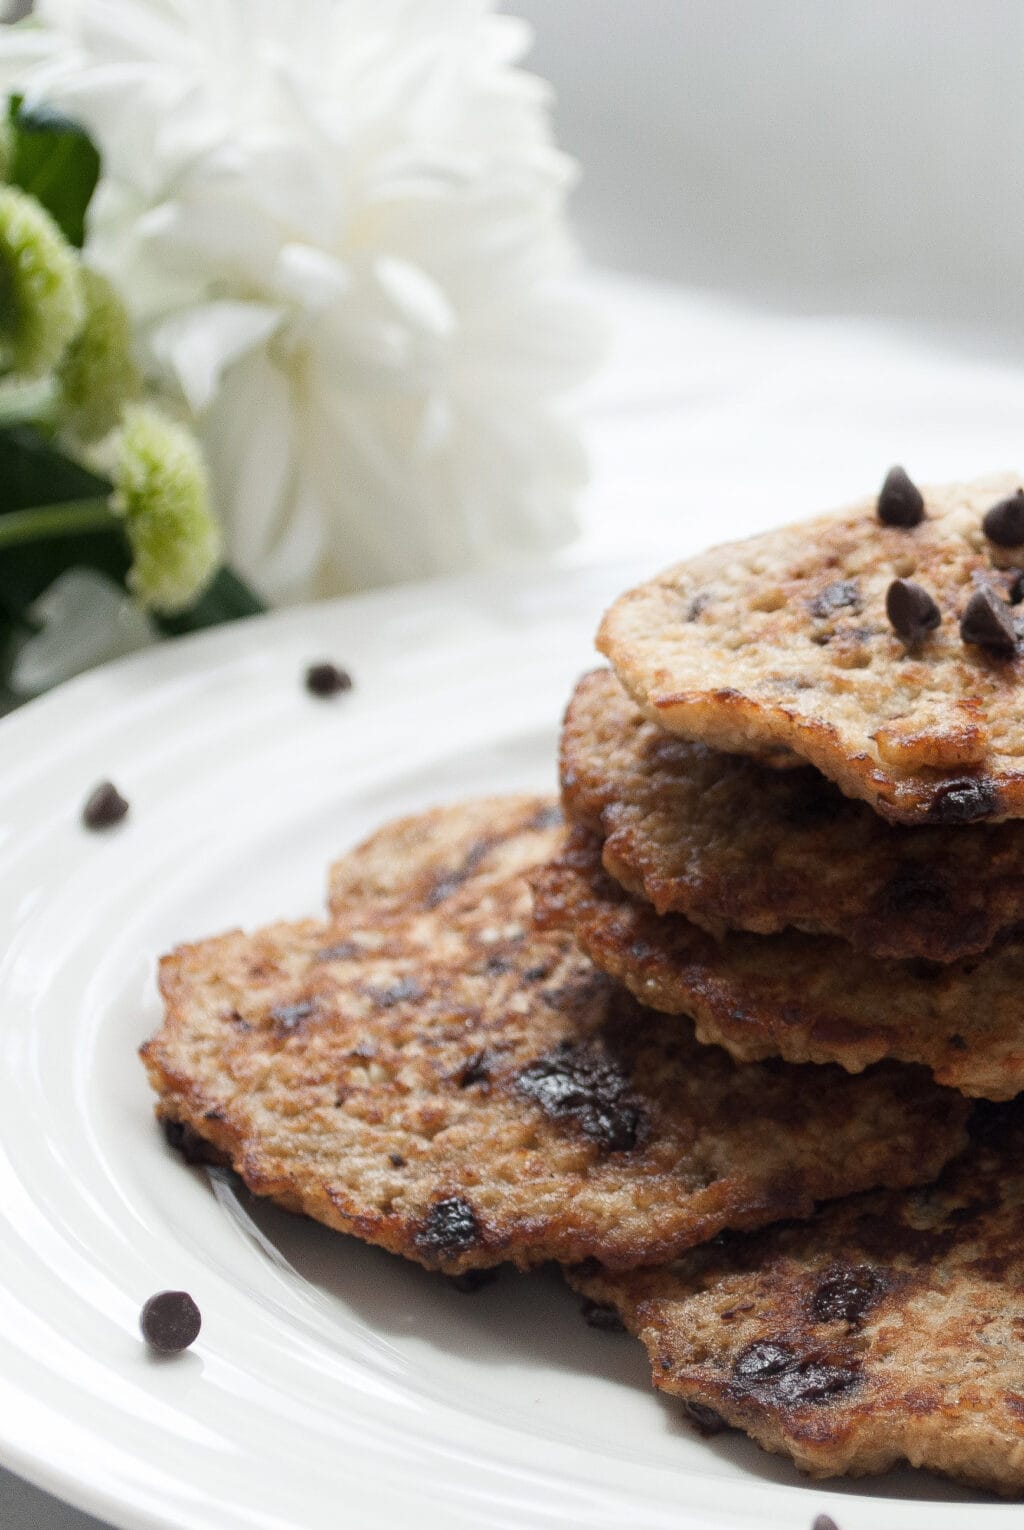 A close up of a stack of 4 banana oat pancakes. The pancakes are topped with chocolate chips. There are white flowers in the background